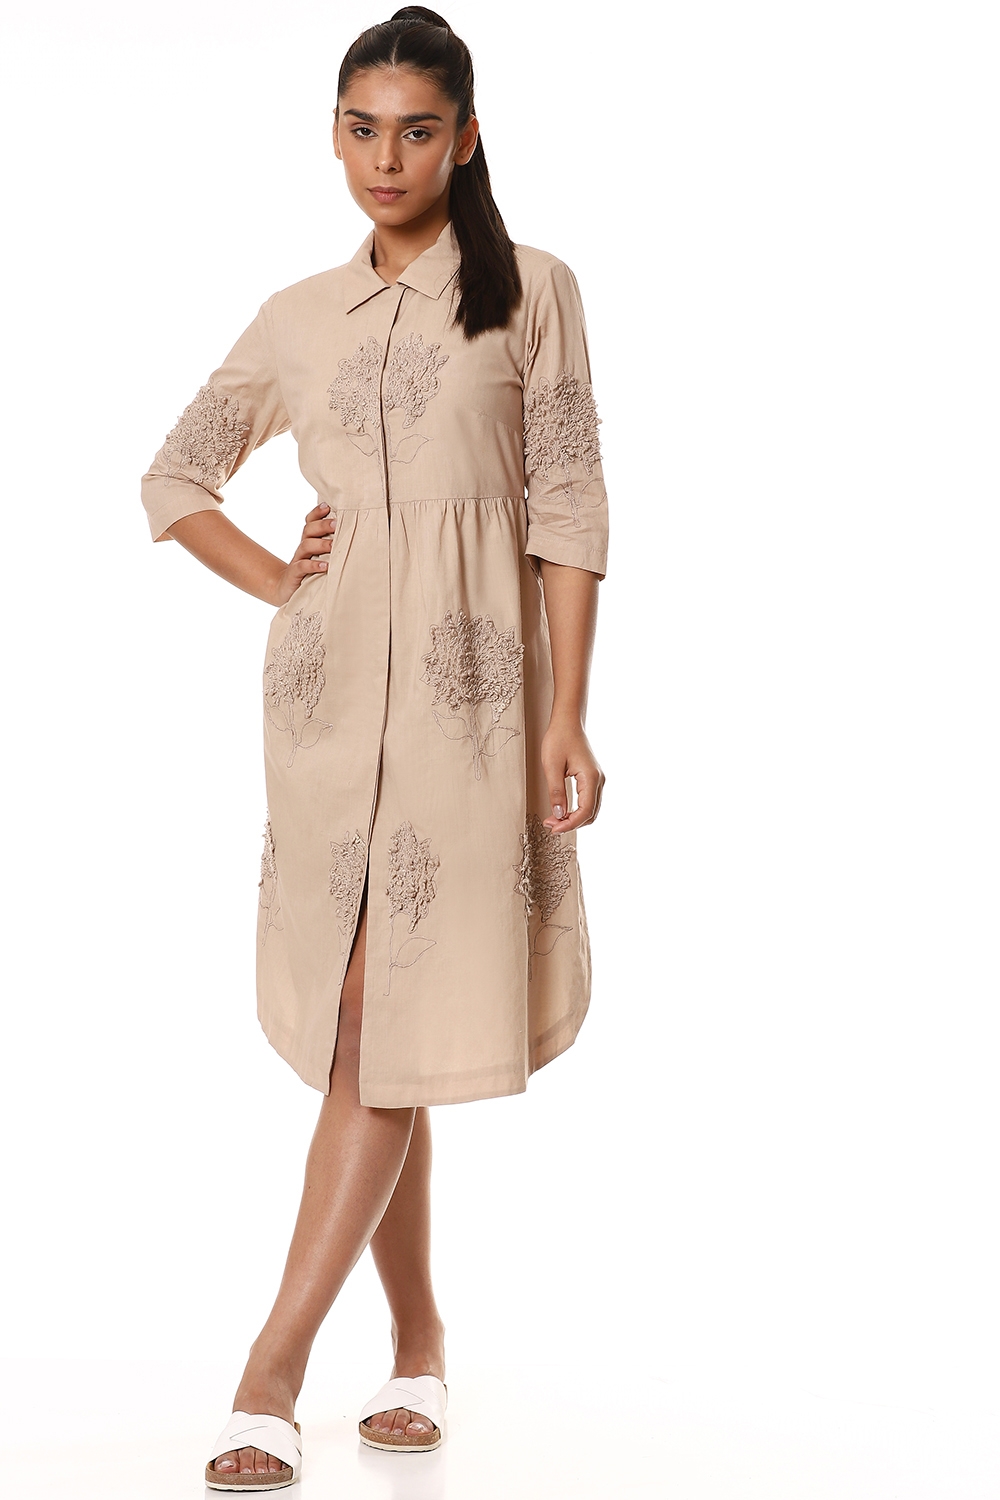 ABRAHAM AND THAKORE | Beige Buta Embroidered Button Dress